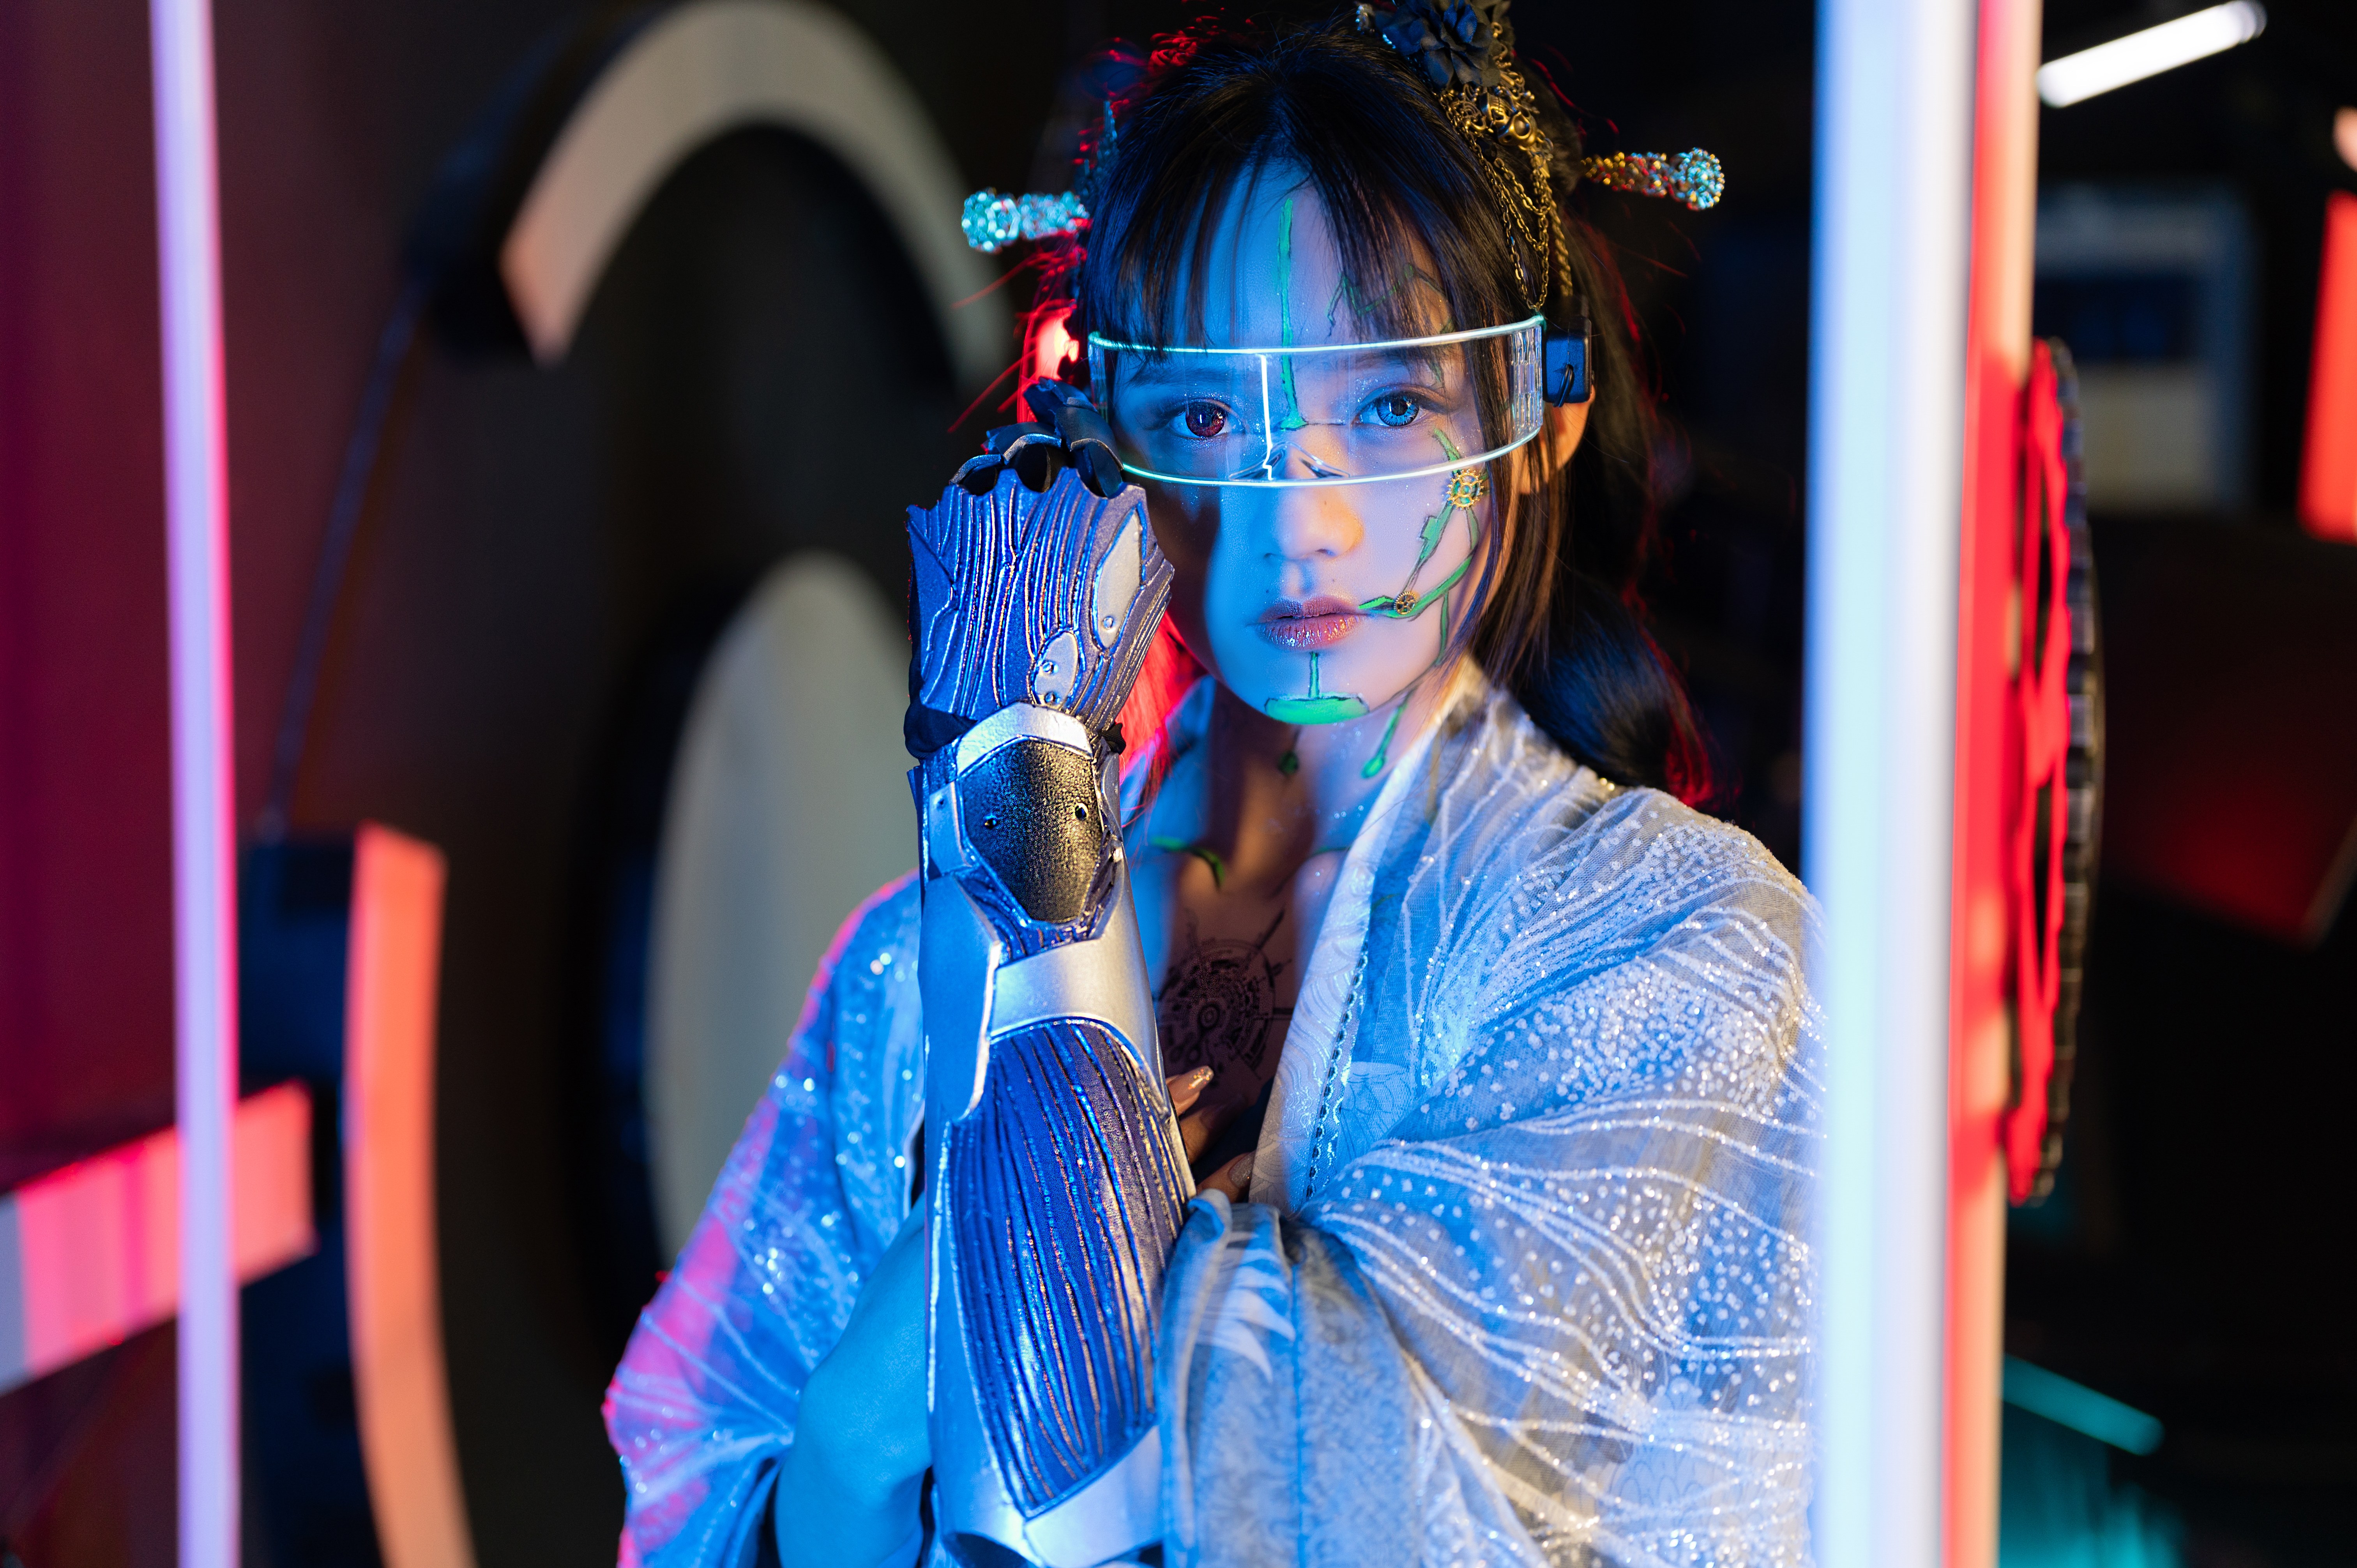 Japanese girl with a cyber arm